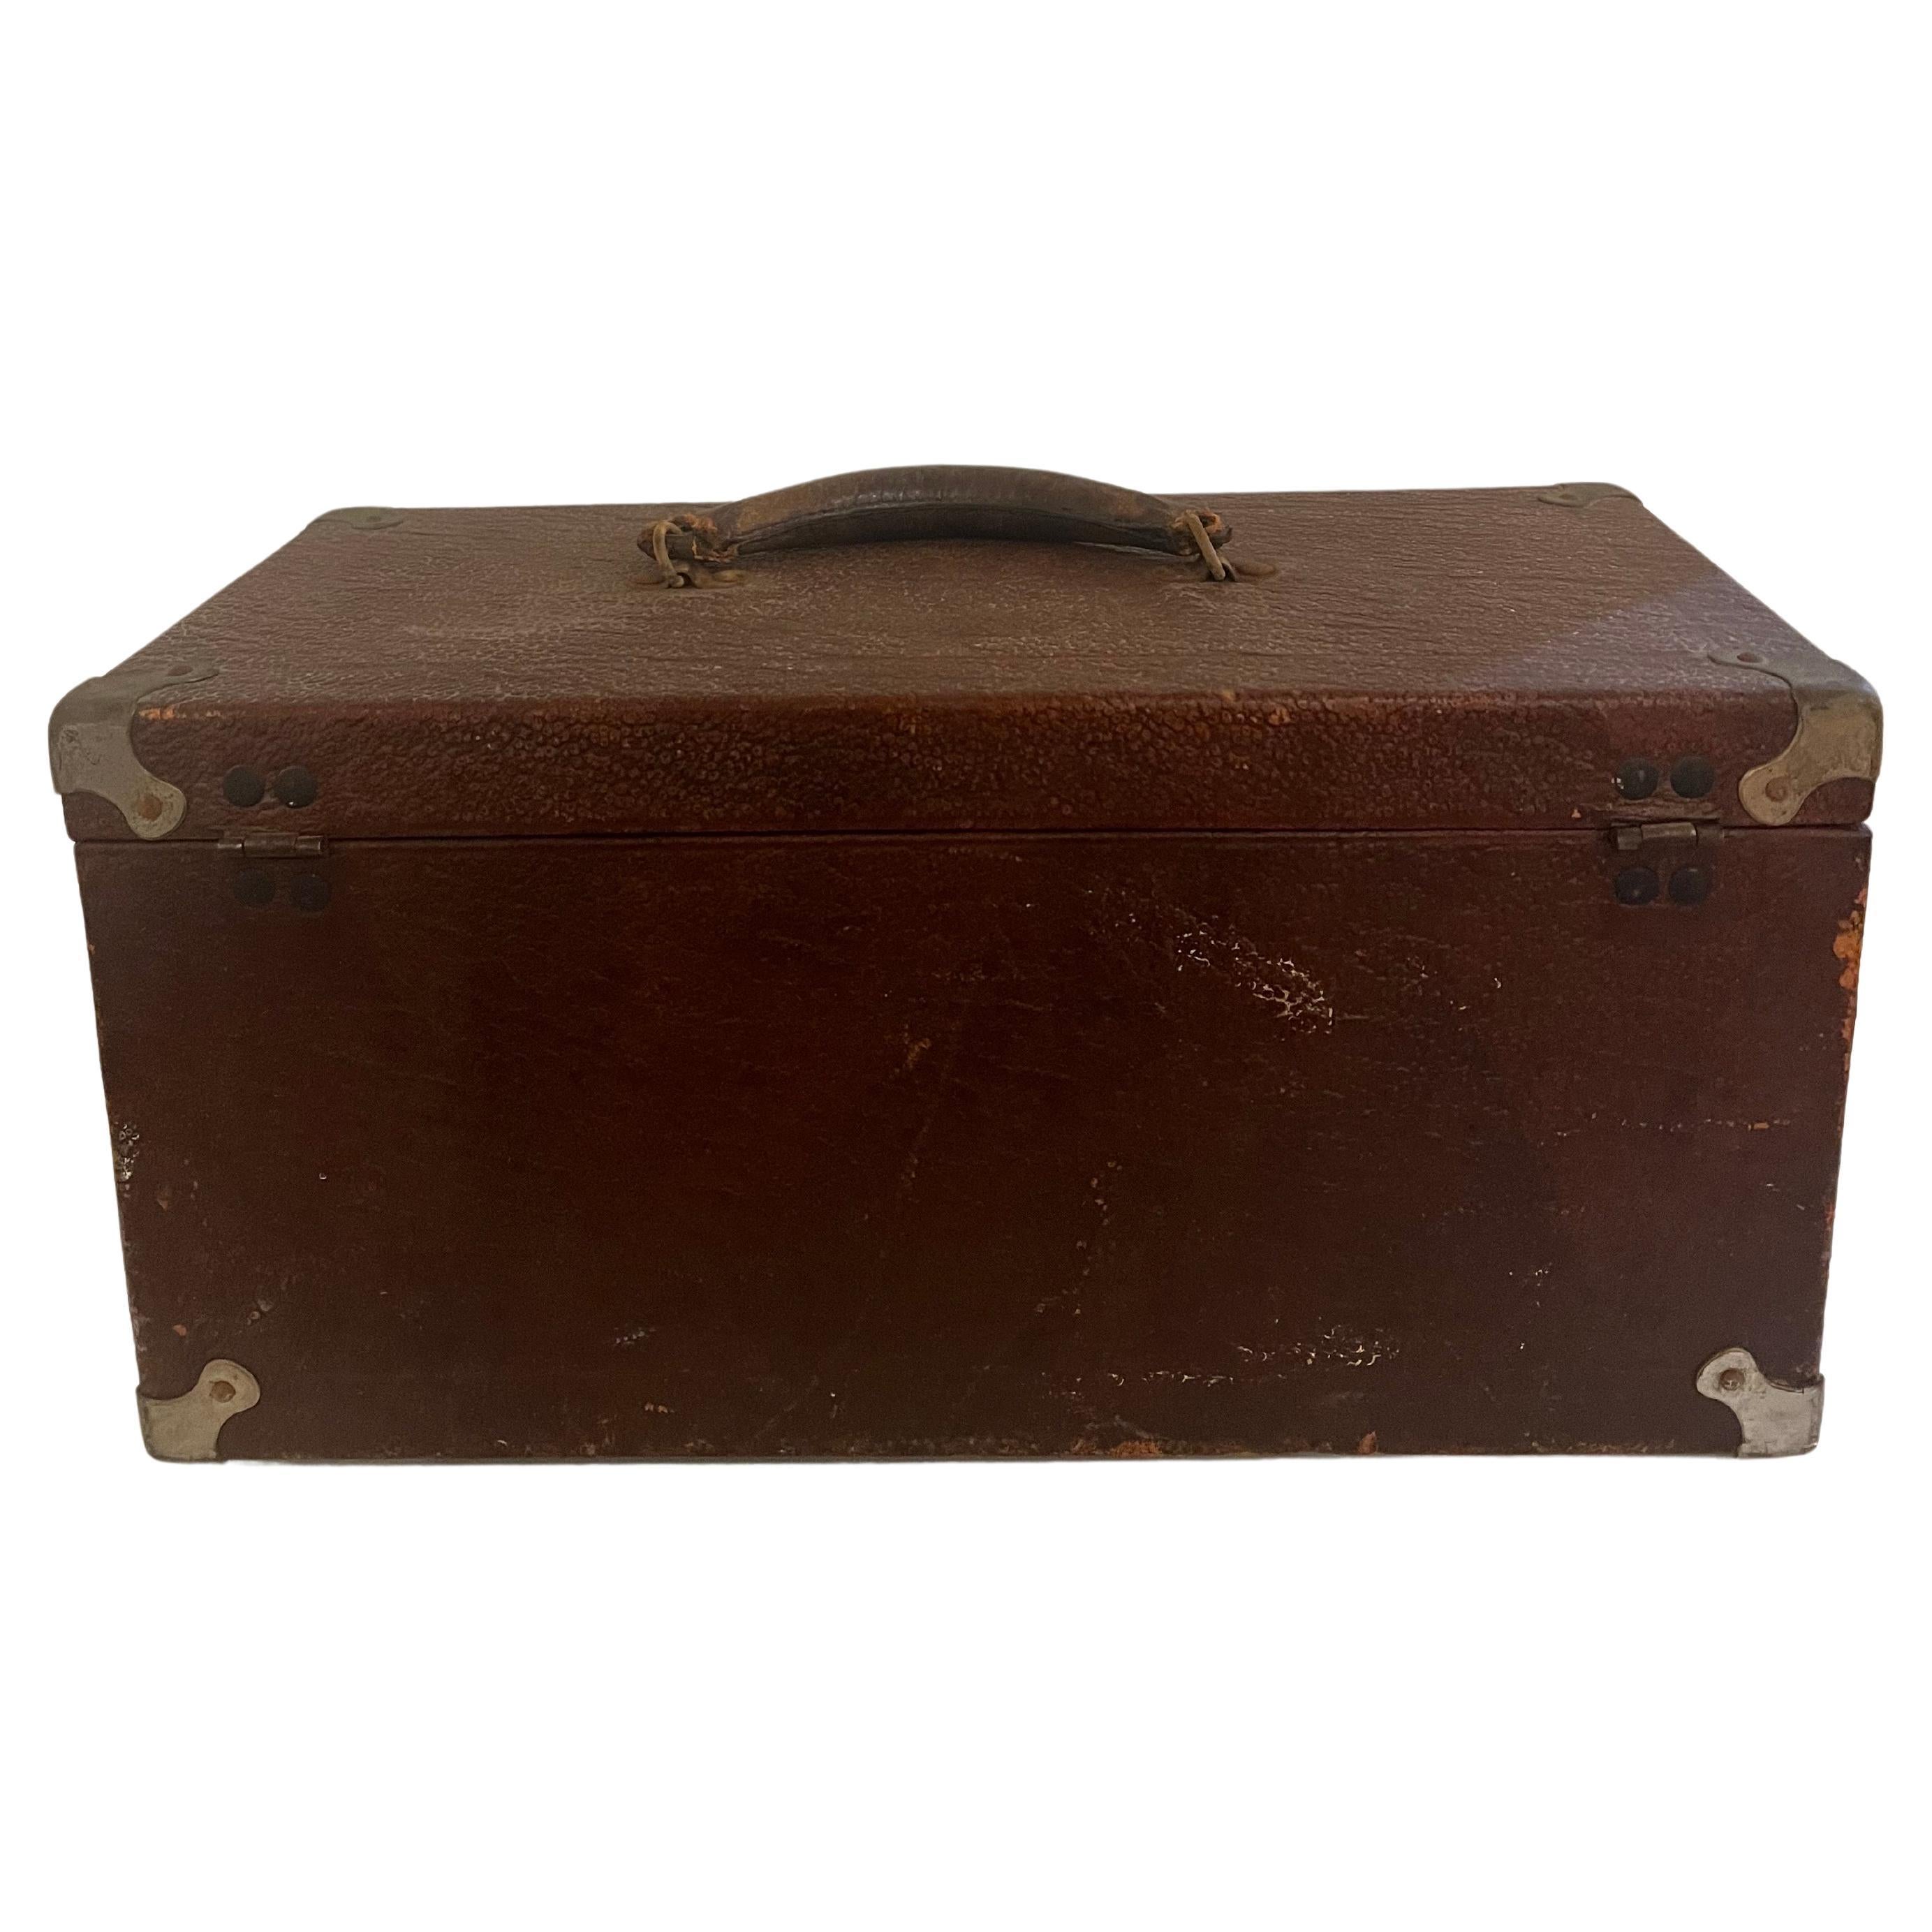 20th Century Antique Leather & Stainless Steel Medical Box with Drawers and compartments